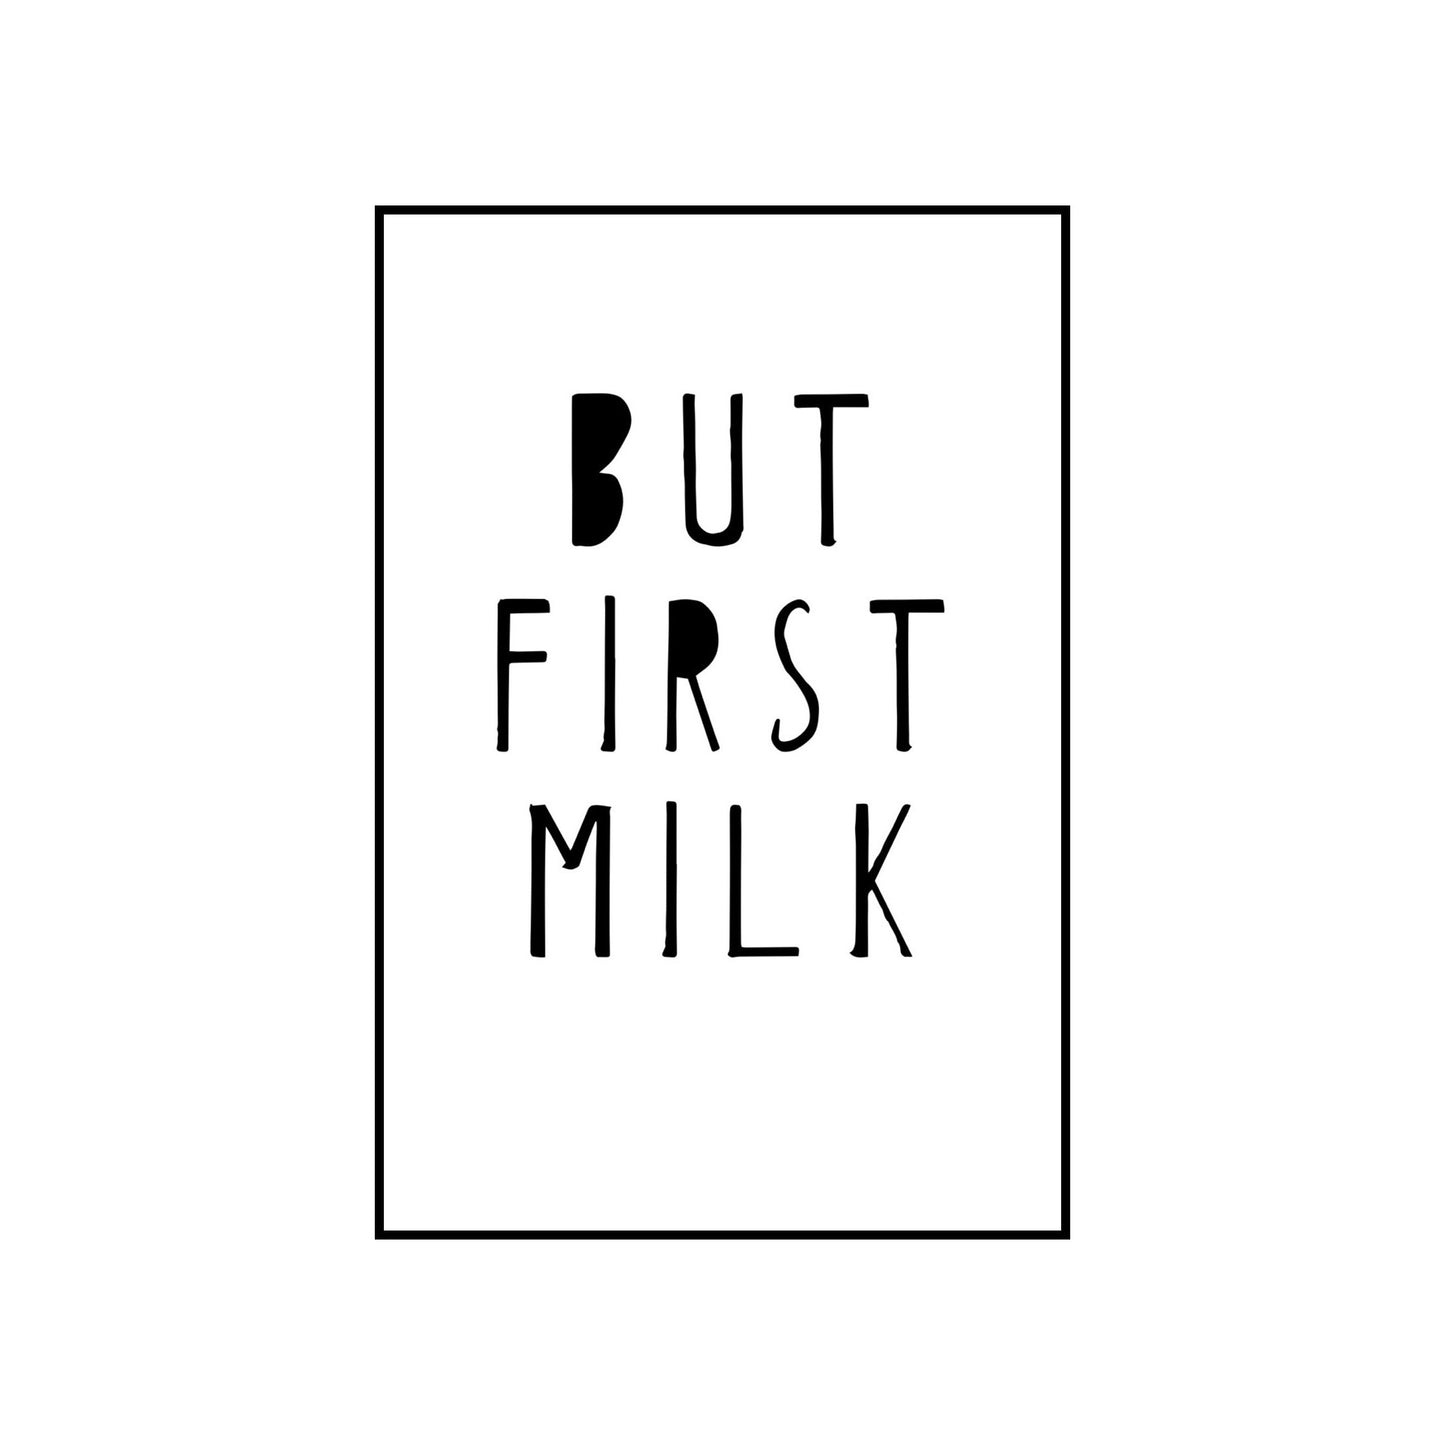 But first milk - THE WALL STYLIST